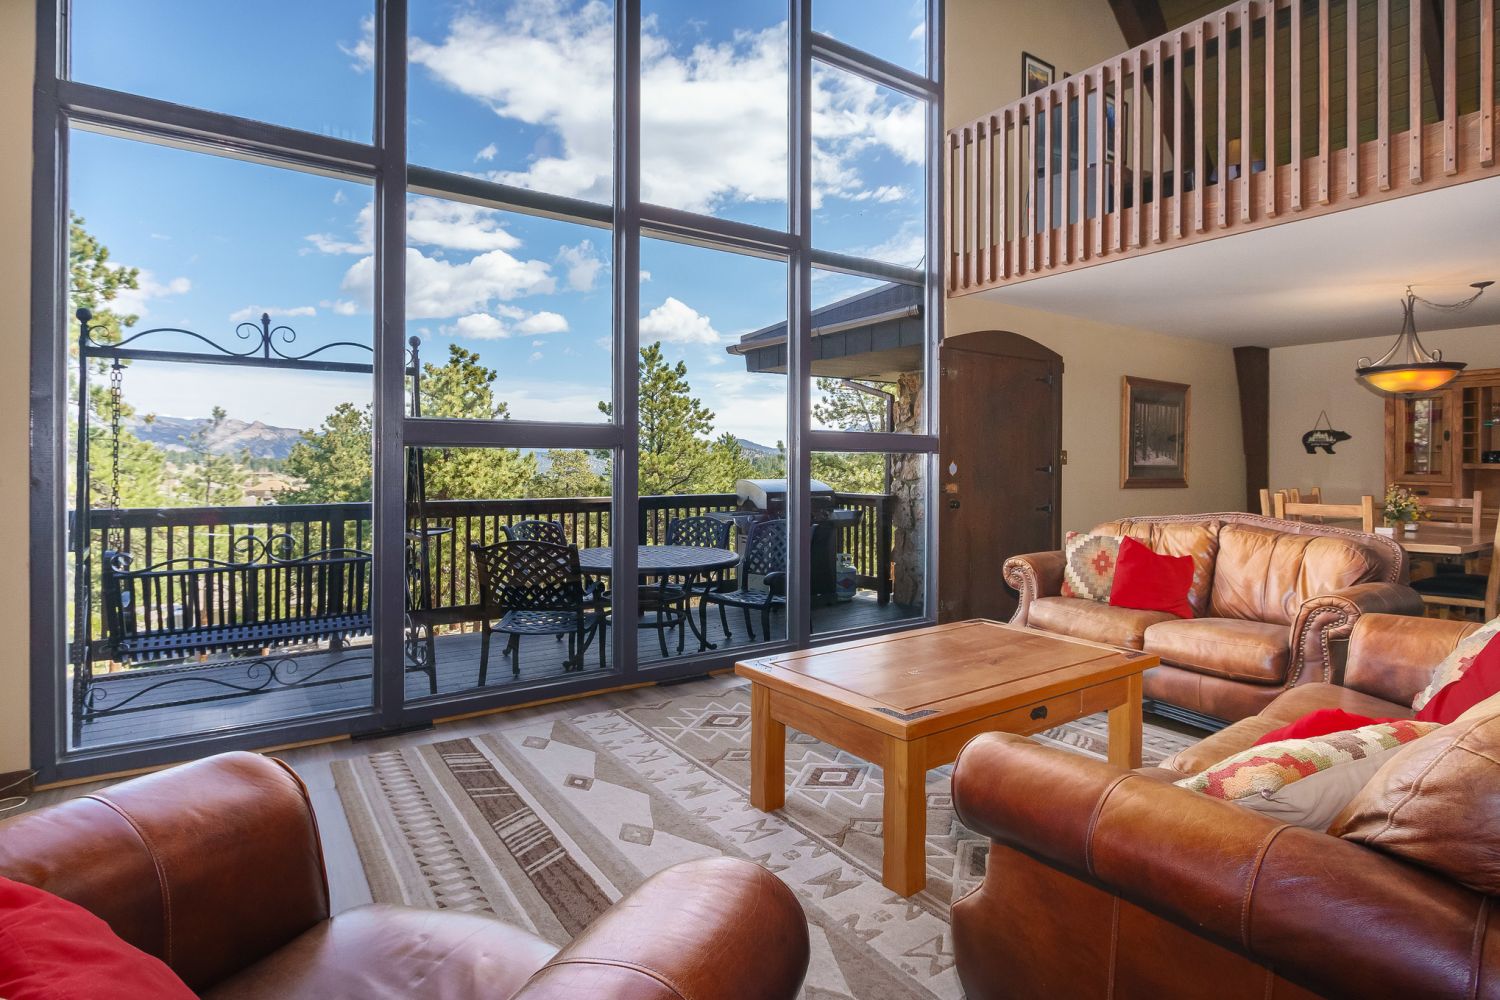 Sky View in the Rockies - Open concept floor plan with cathedral ceiling and floor to ceiling windows. 